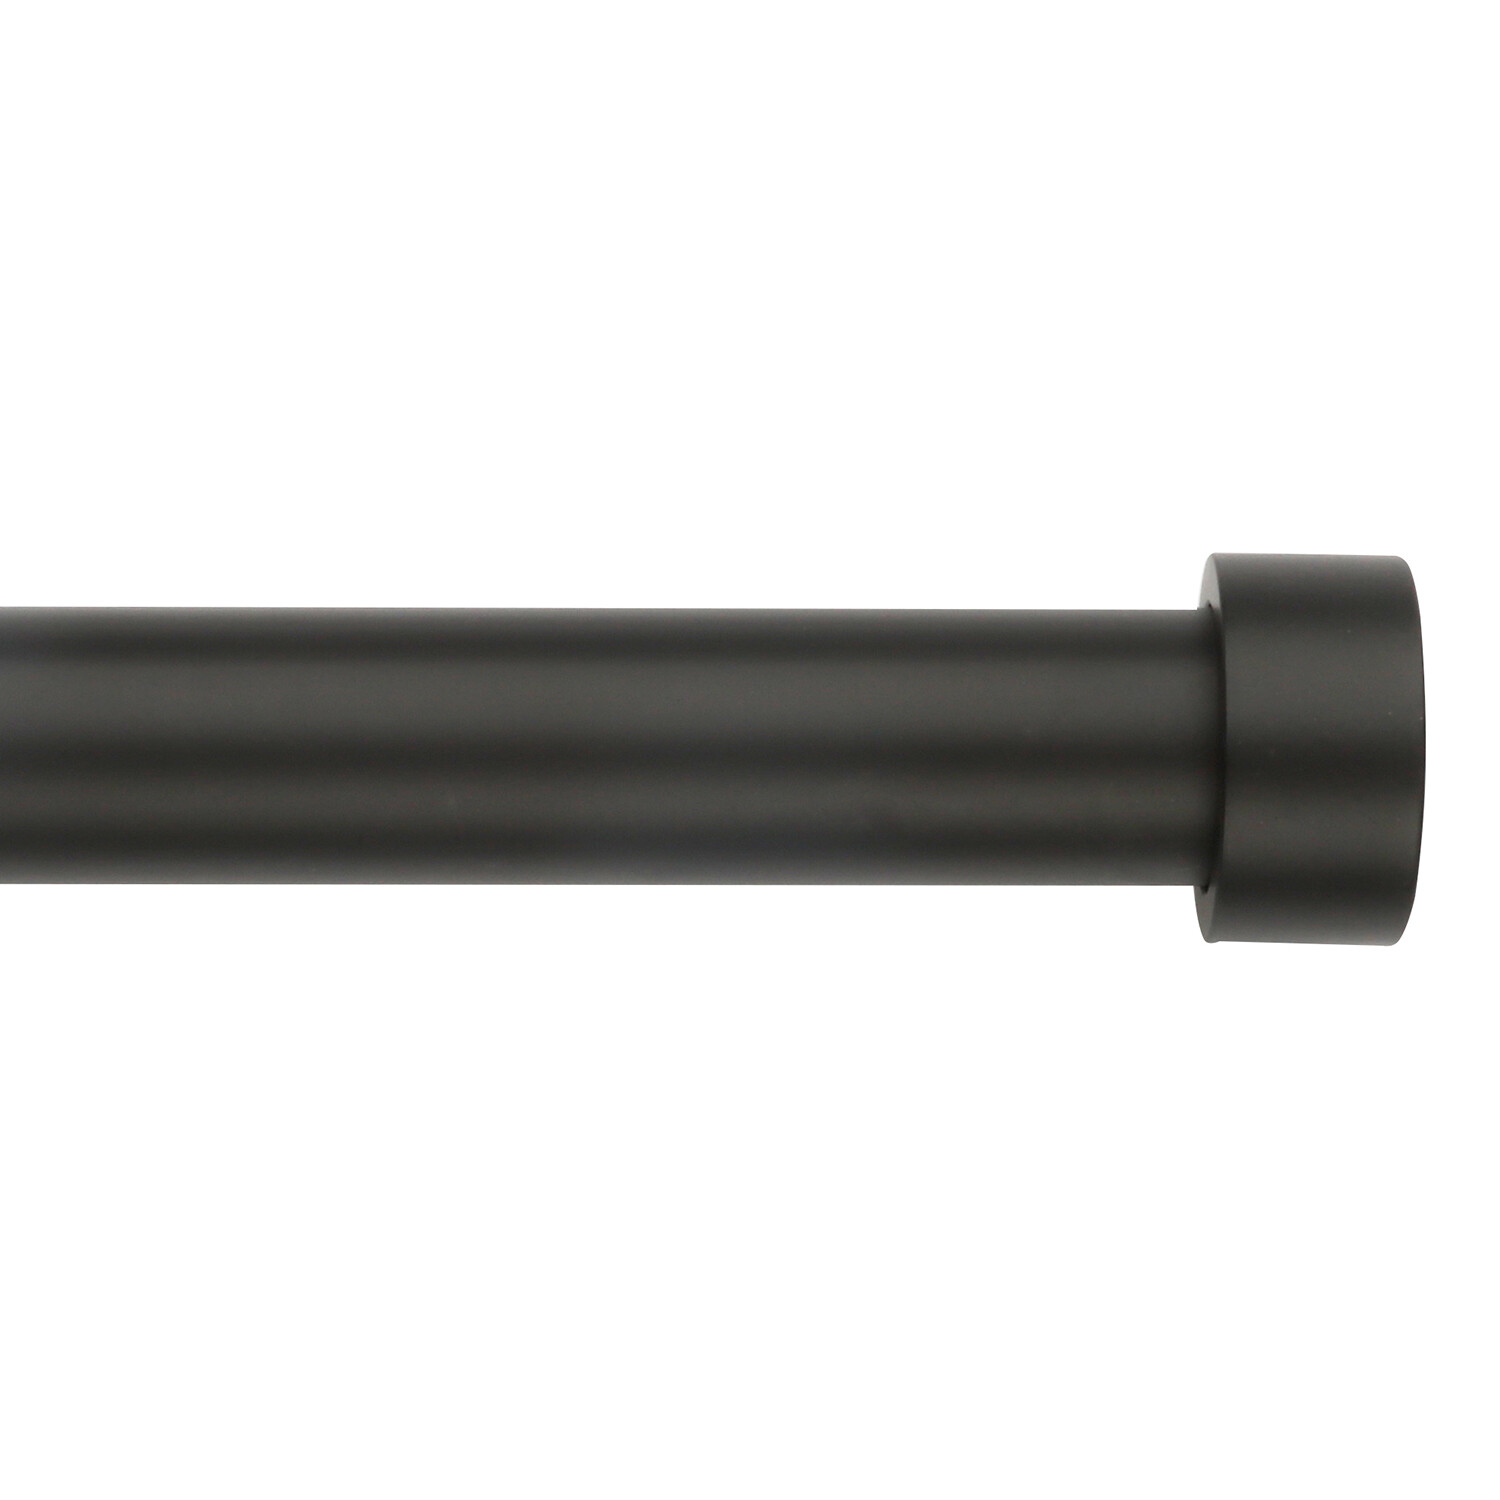 Stockholm 120 to 210 Extendable Black Curtain Pole Image